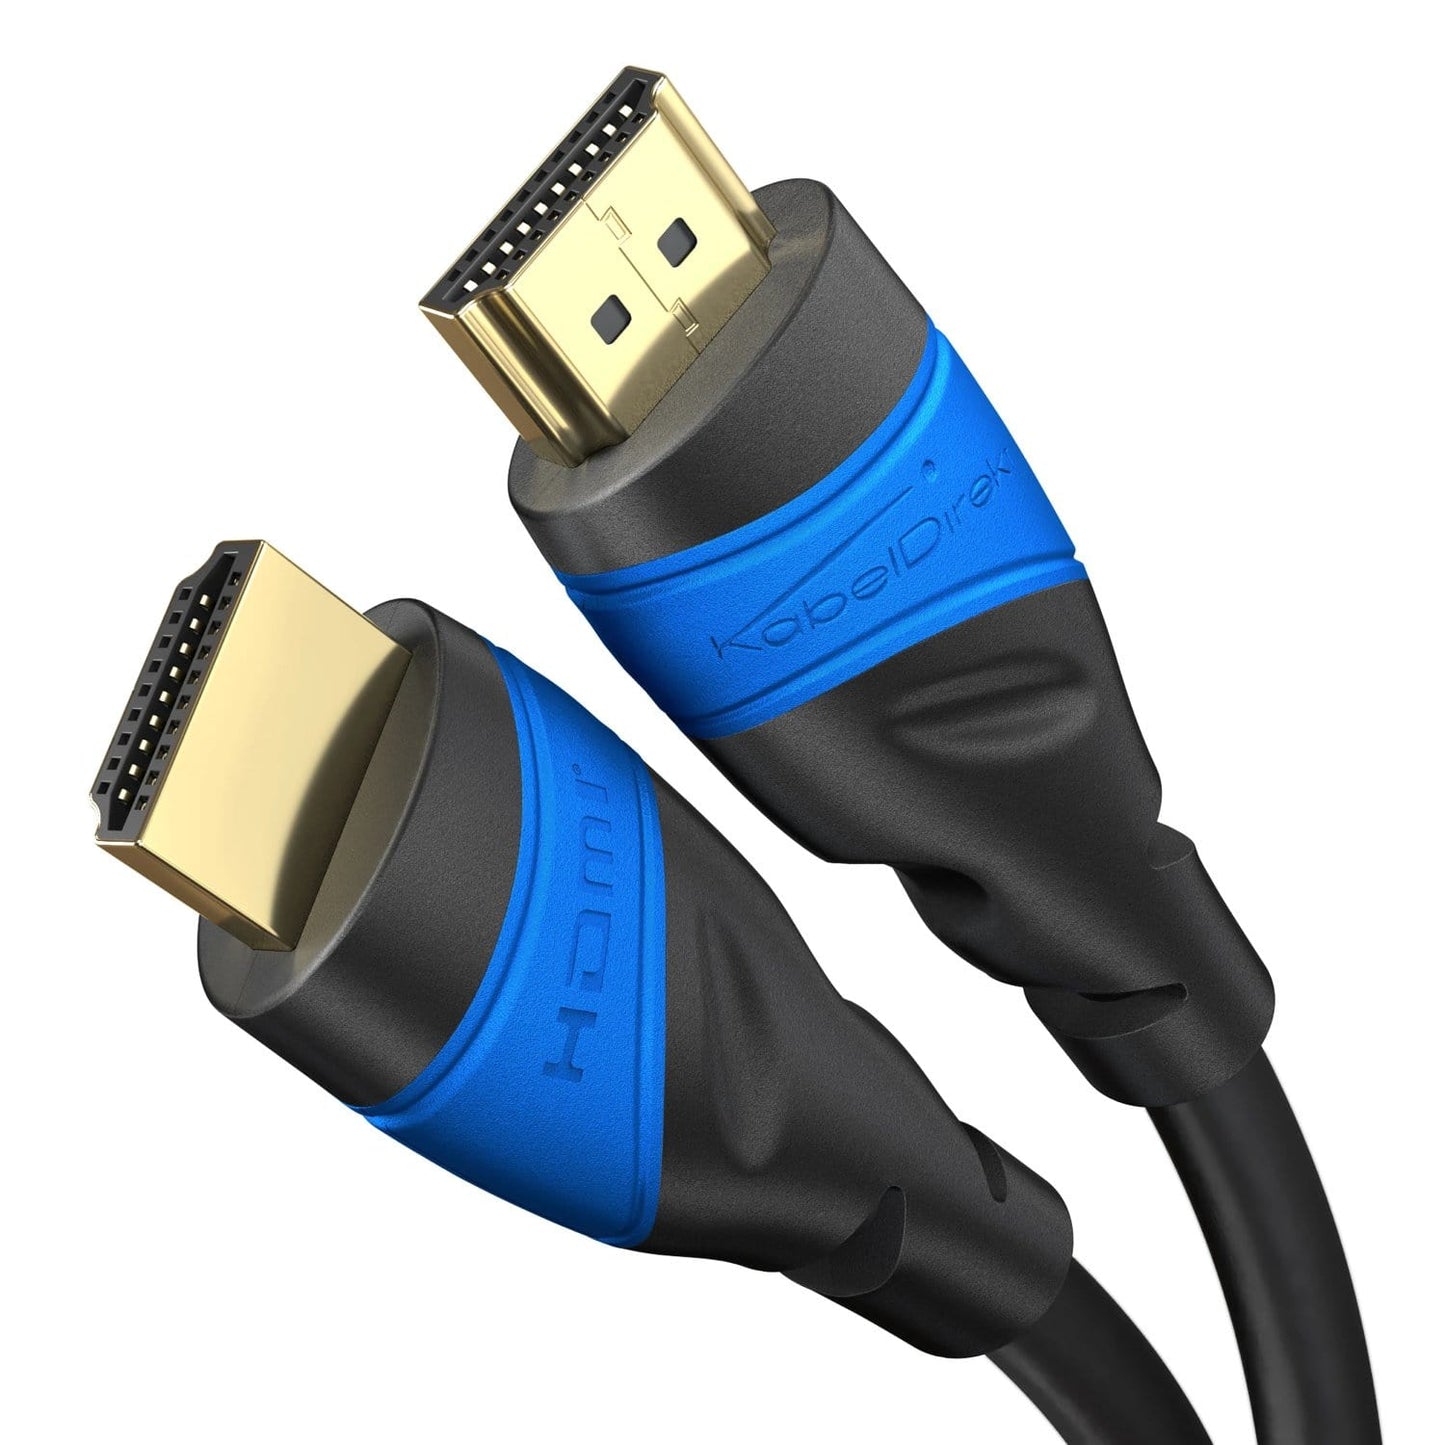 High-speed HDMI 2.0 cable – Features: 3d-ready, HDR, ARC – KabelDirekt